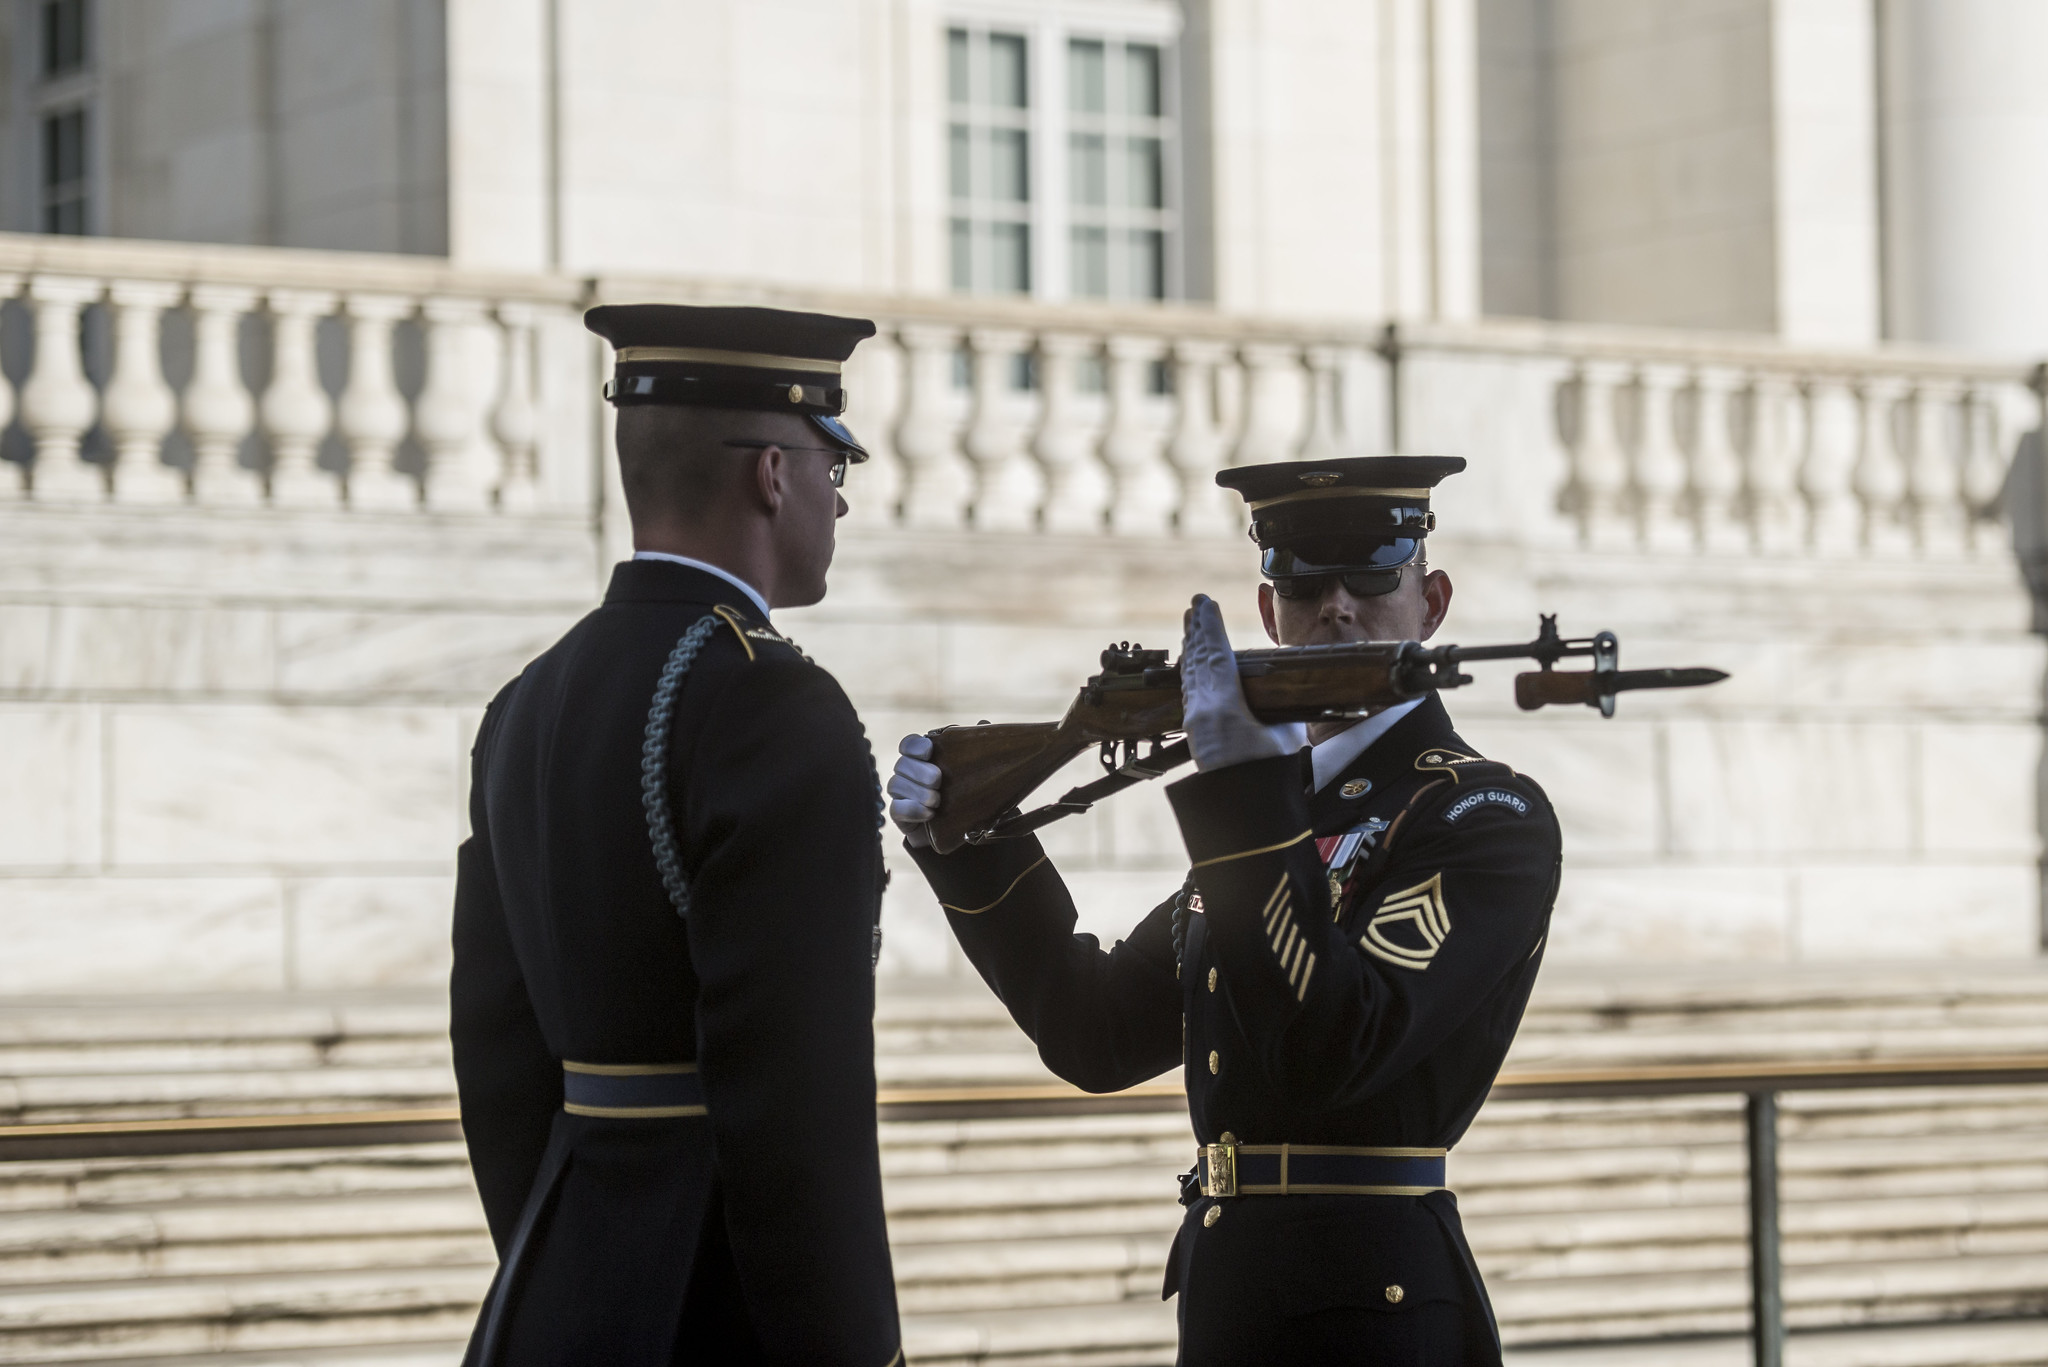 Two members of the 3rd U.S. Infantry Regiment (The Old Guard) participate in the changing of the guard at the Tomb of the Unknown Soldier